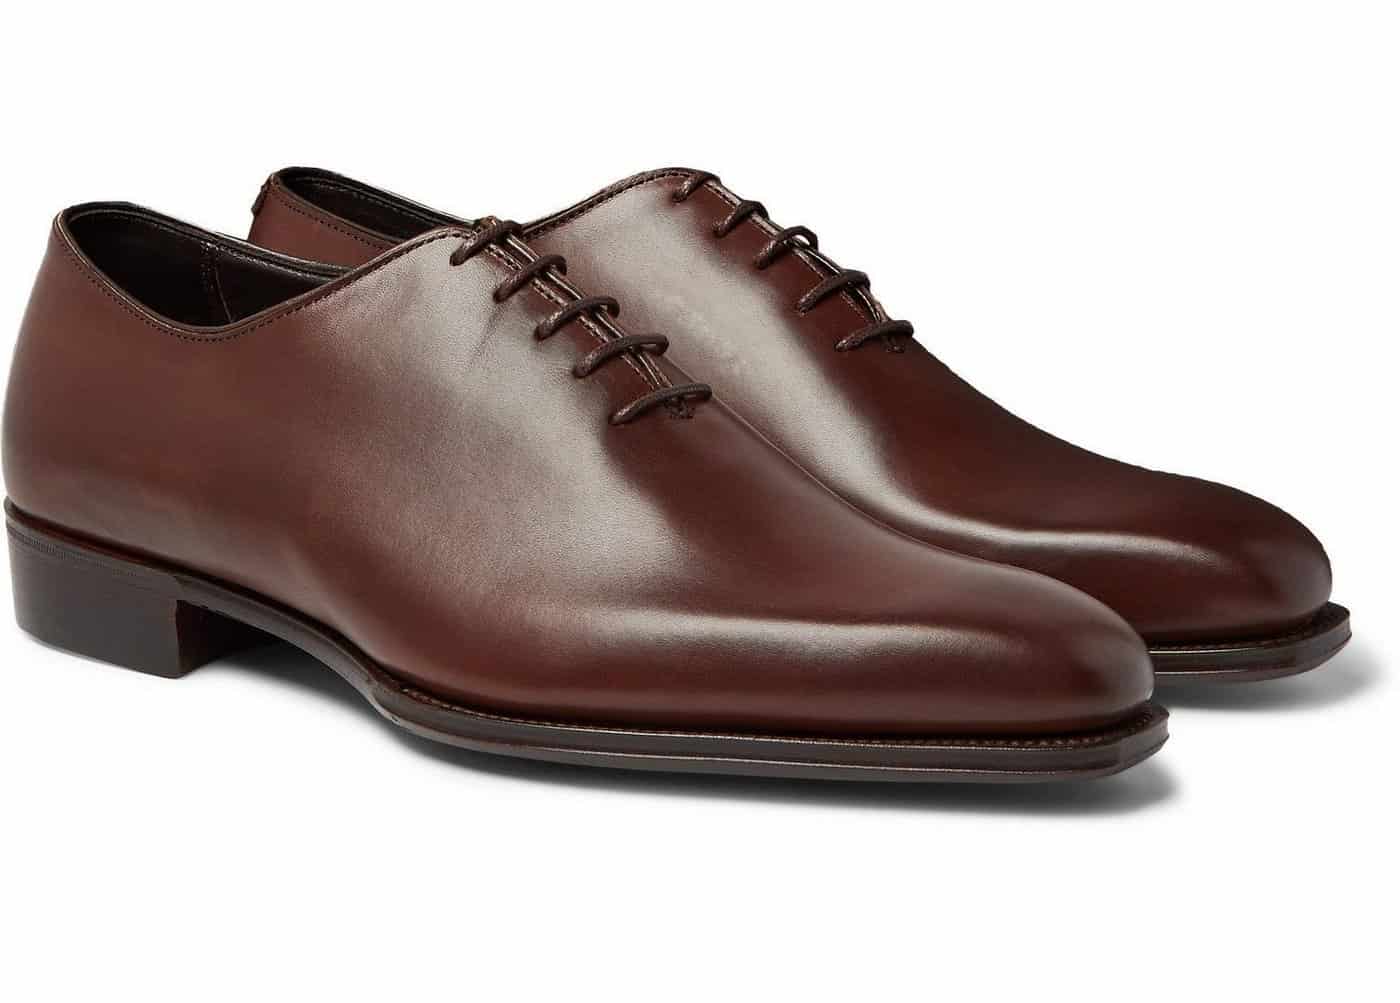 Kingsman x George Cleverley oxfords